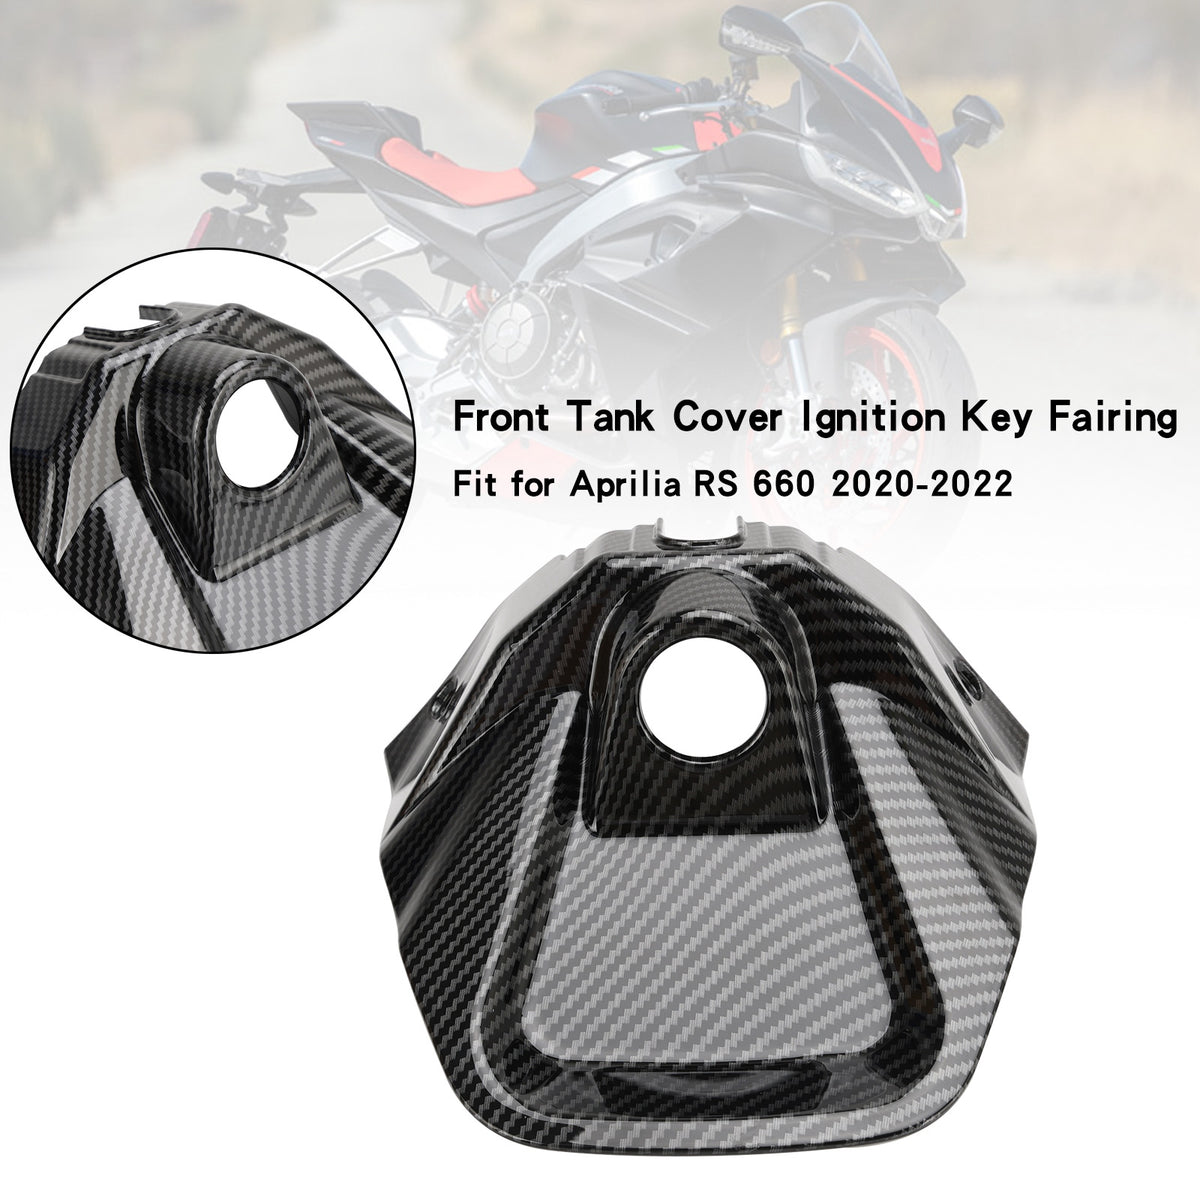 Carbon Front Tank Cover Ignition Key Fairing for Aprilia RS 660 2020-2022